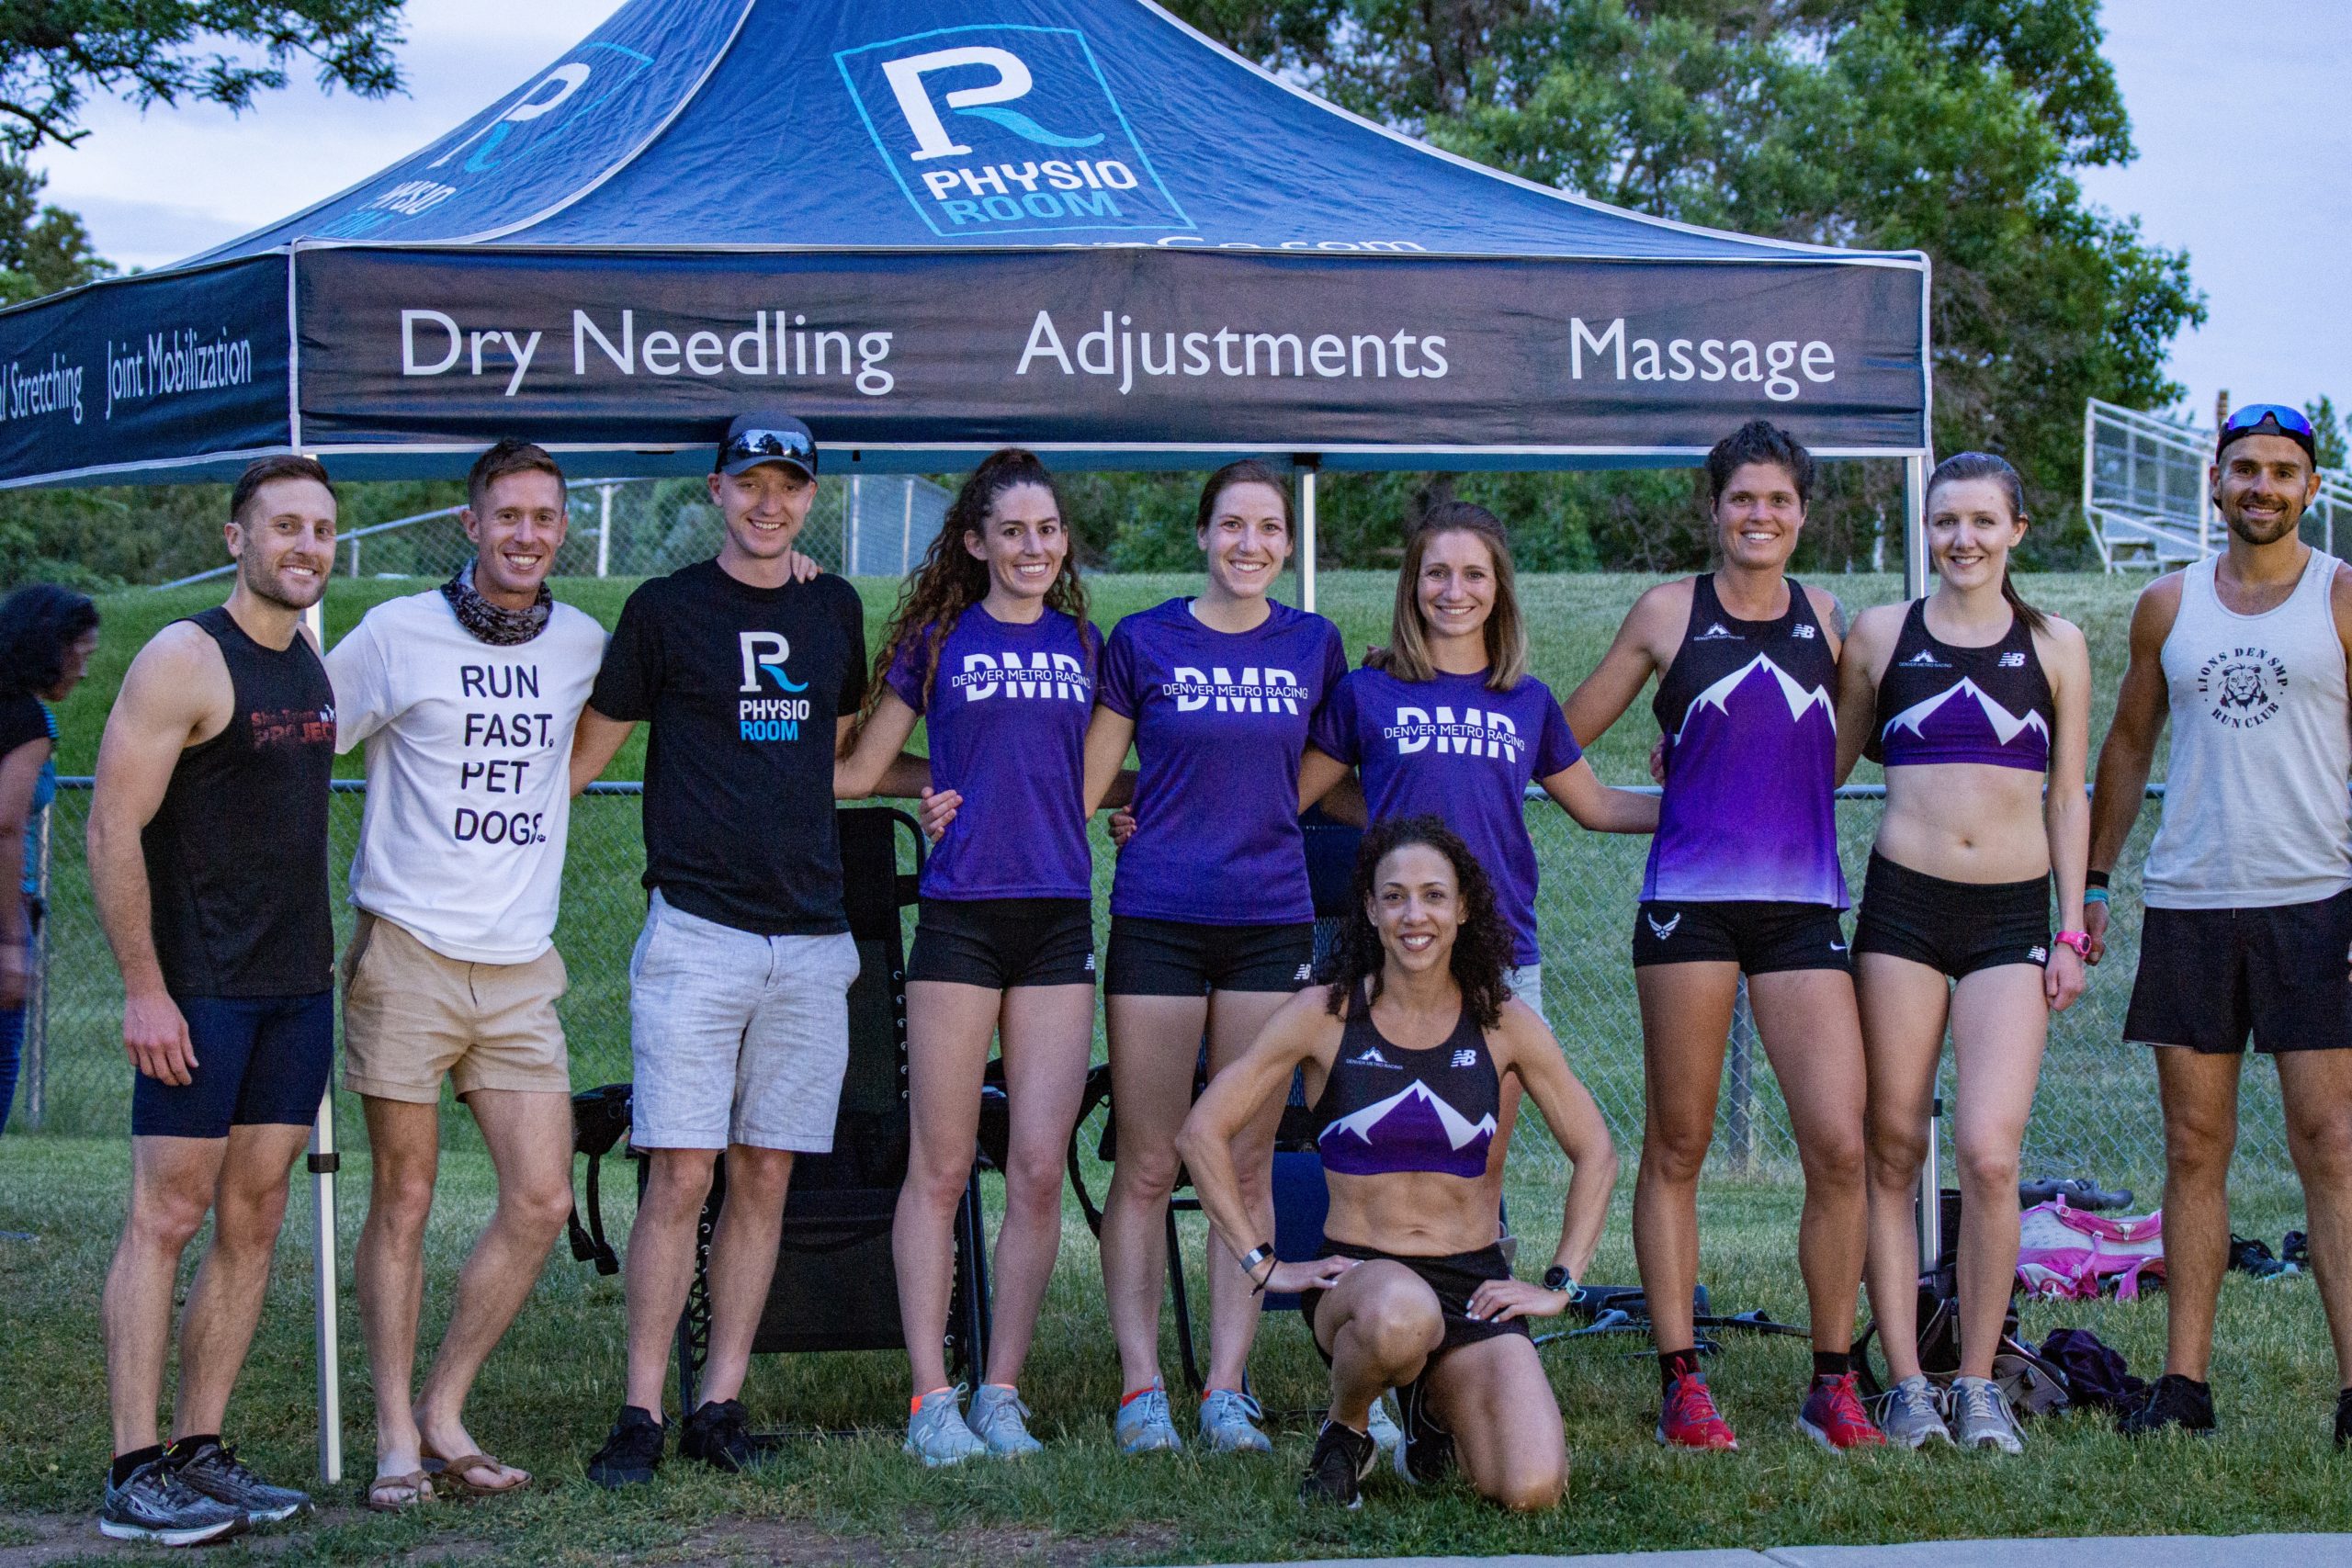 Denver Metro Racing and Physio Room team